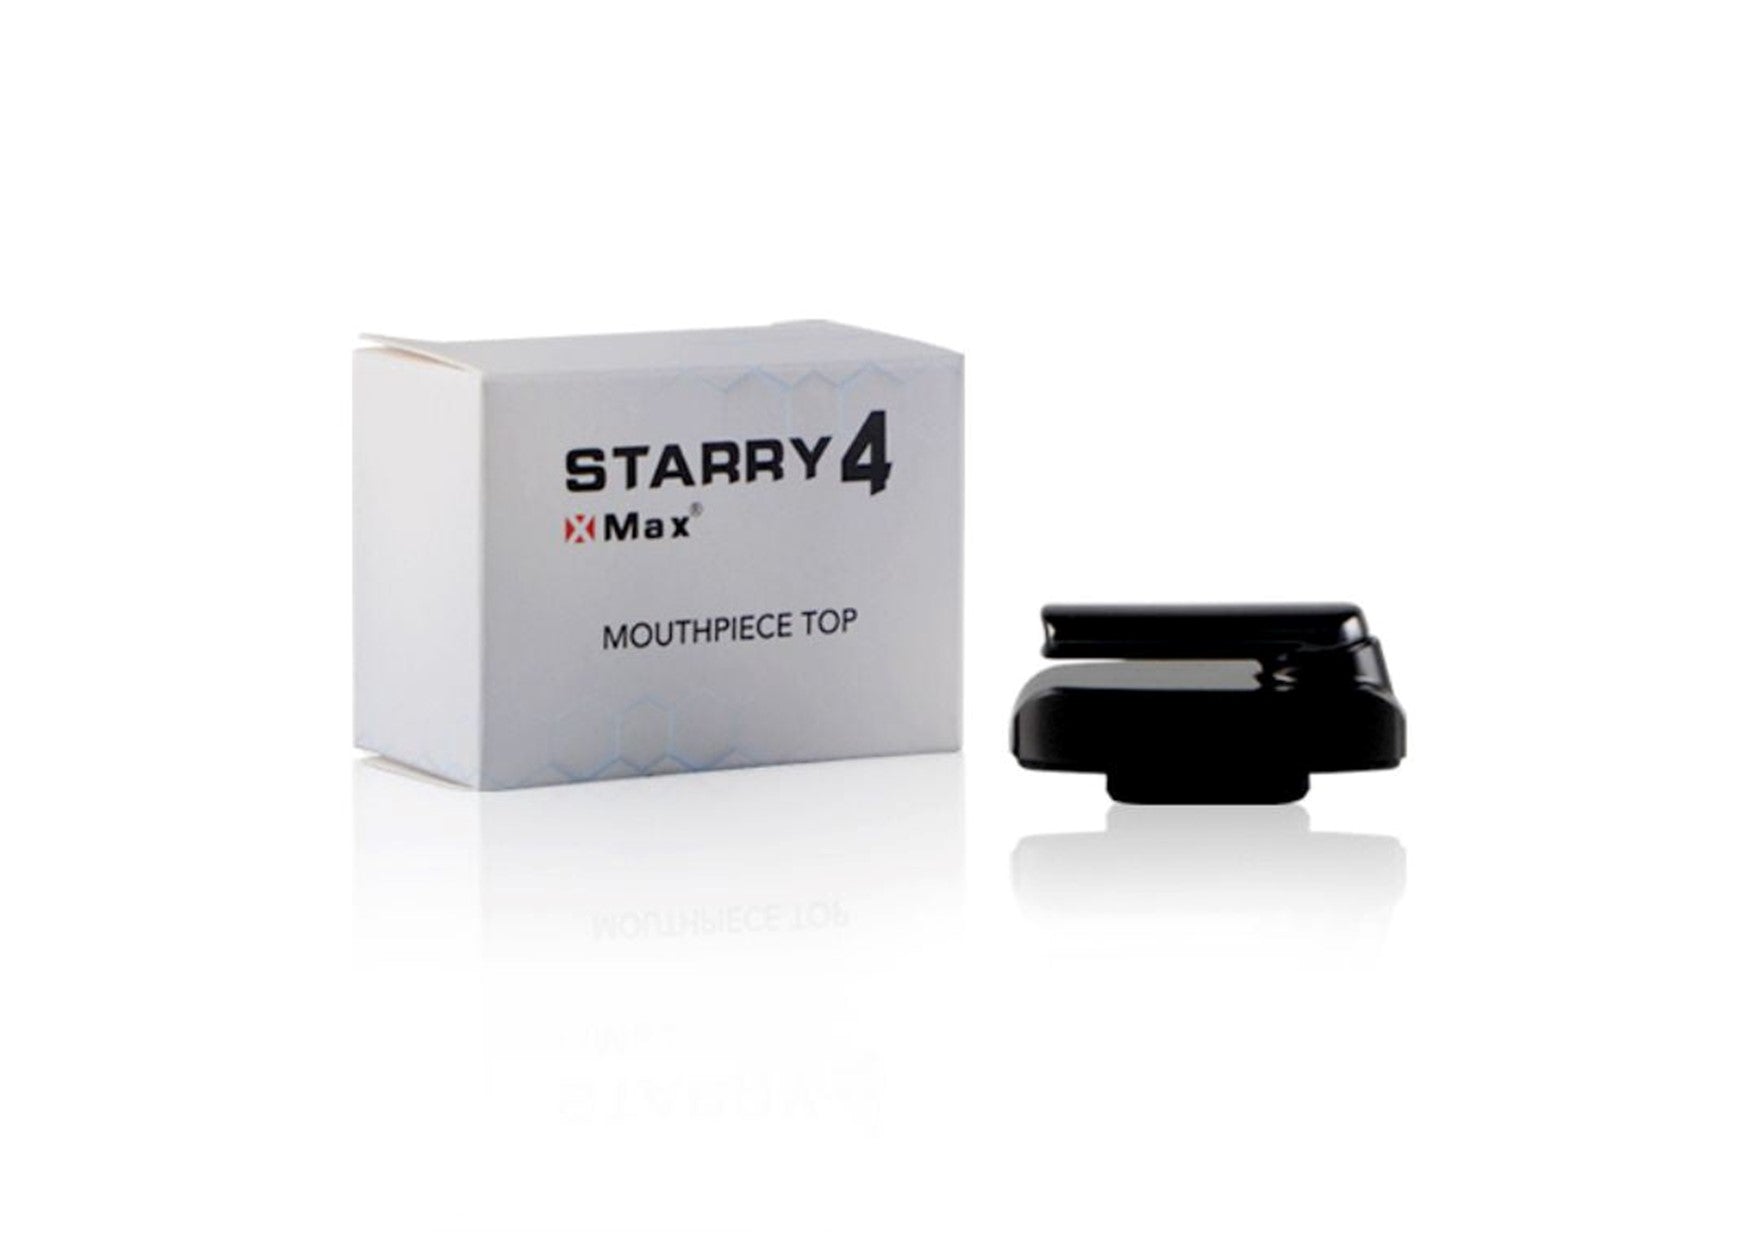 XMAX | Starry 4.0 Mouthpiece Top